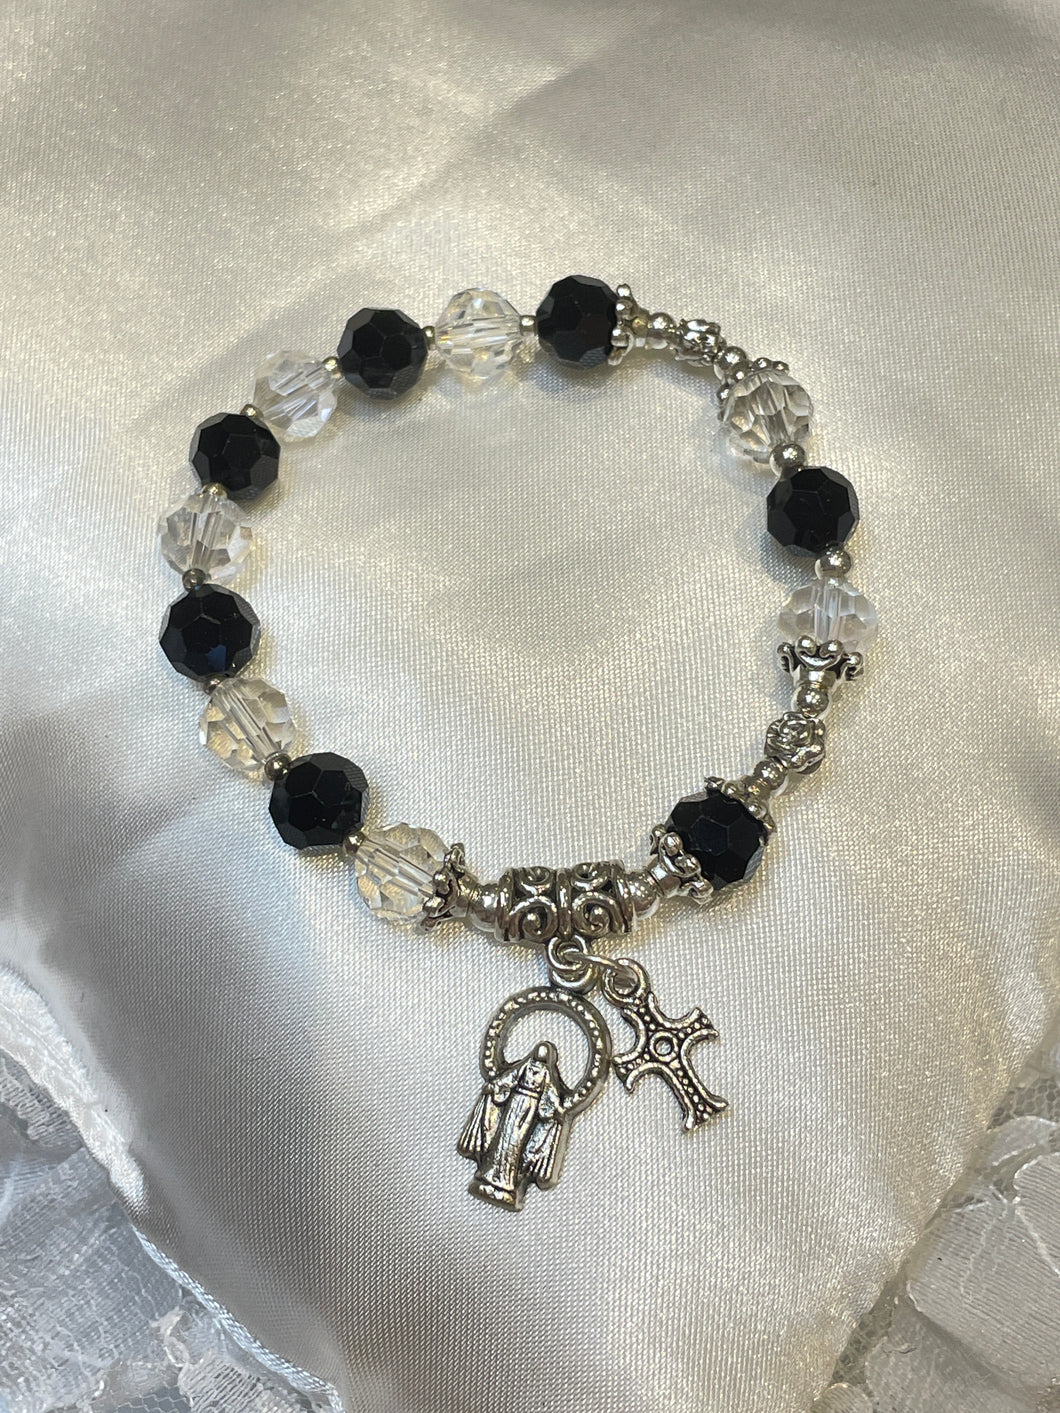 Black and Clear Crystal Rosary Bracelet with Our Lady of Grace and Cross Charms